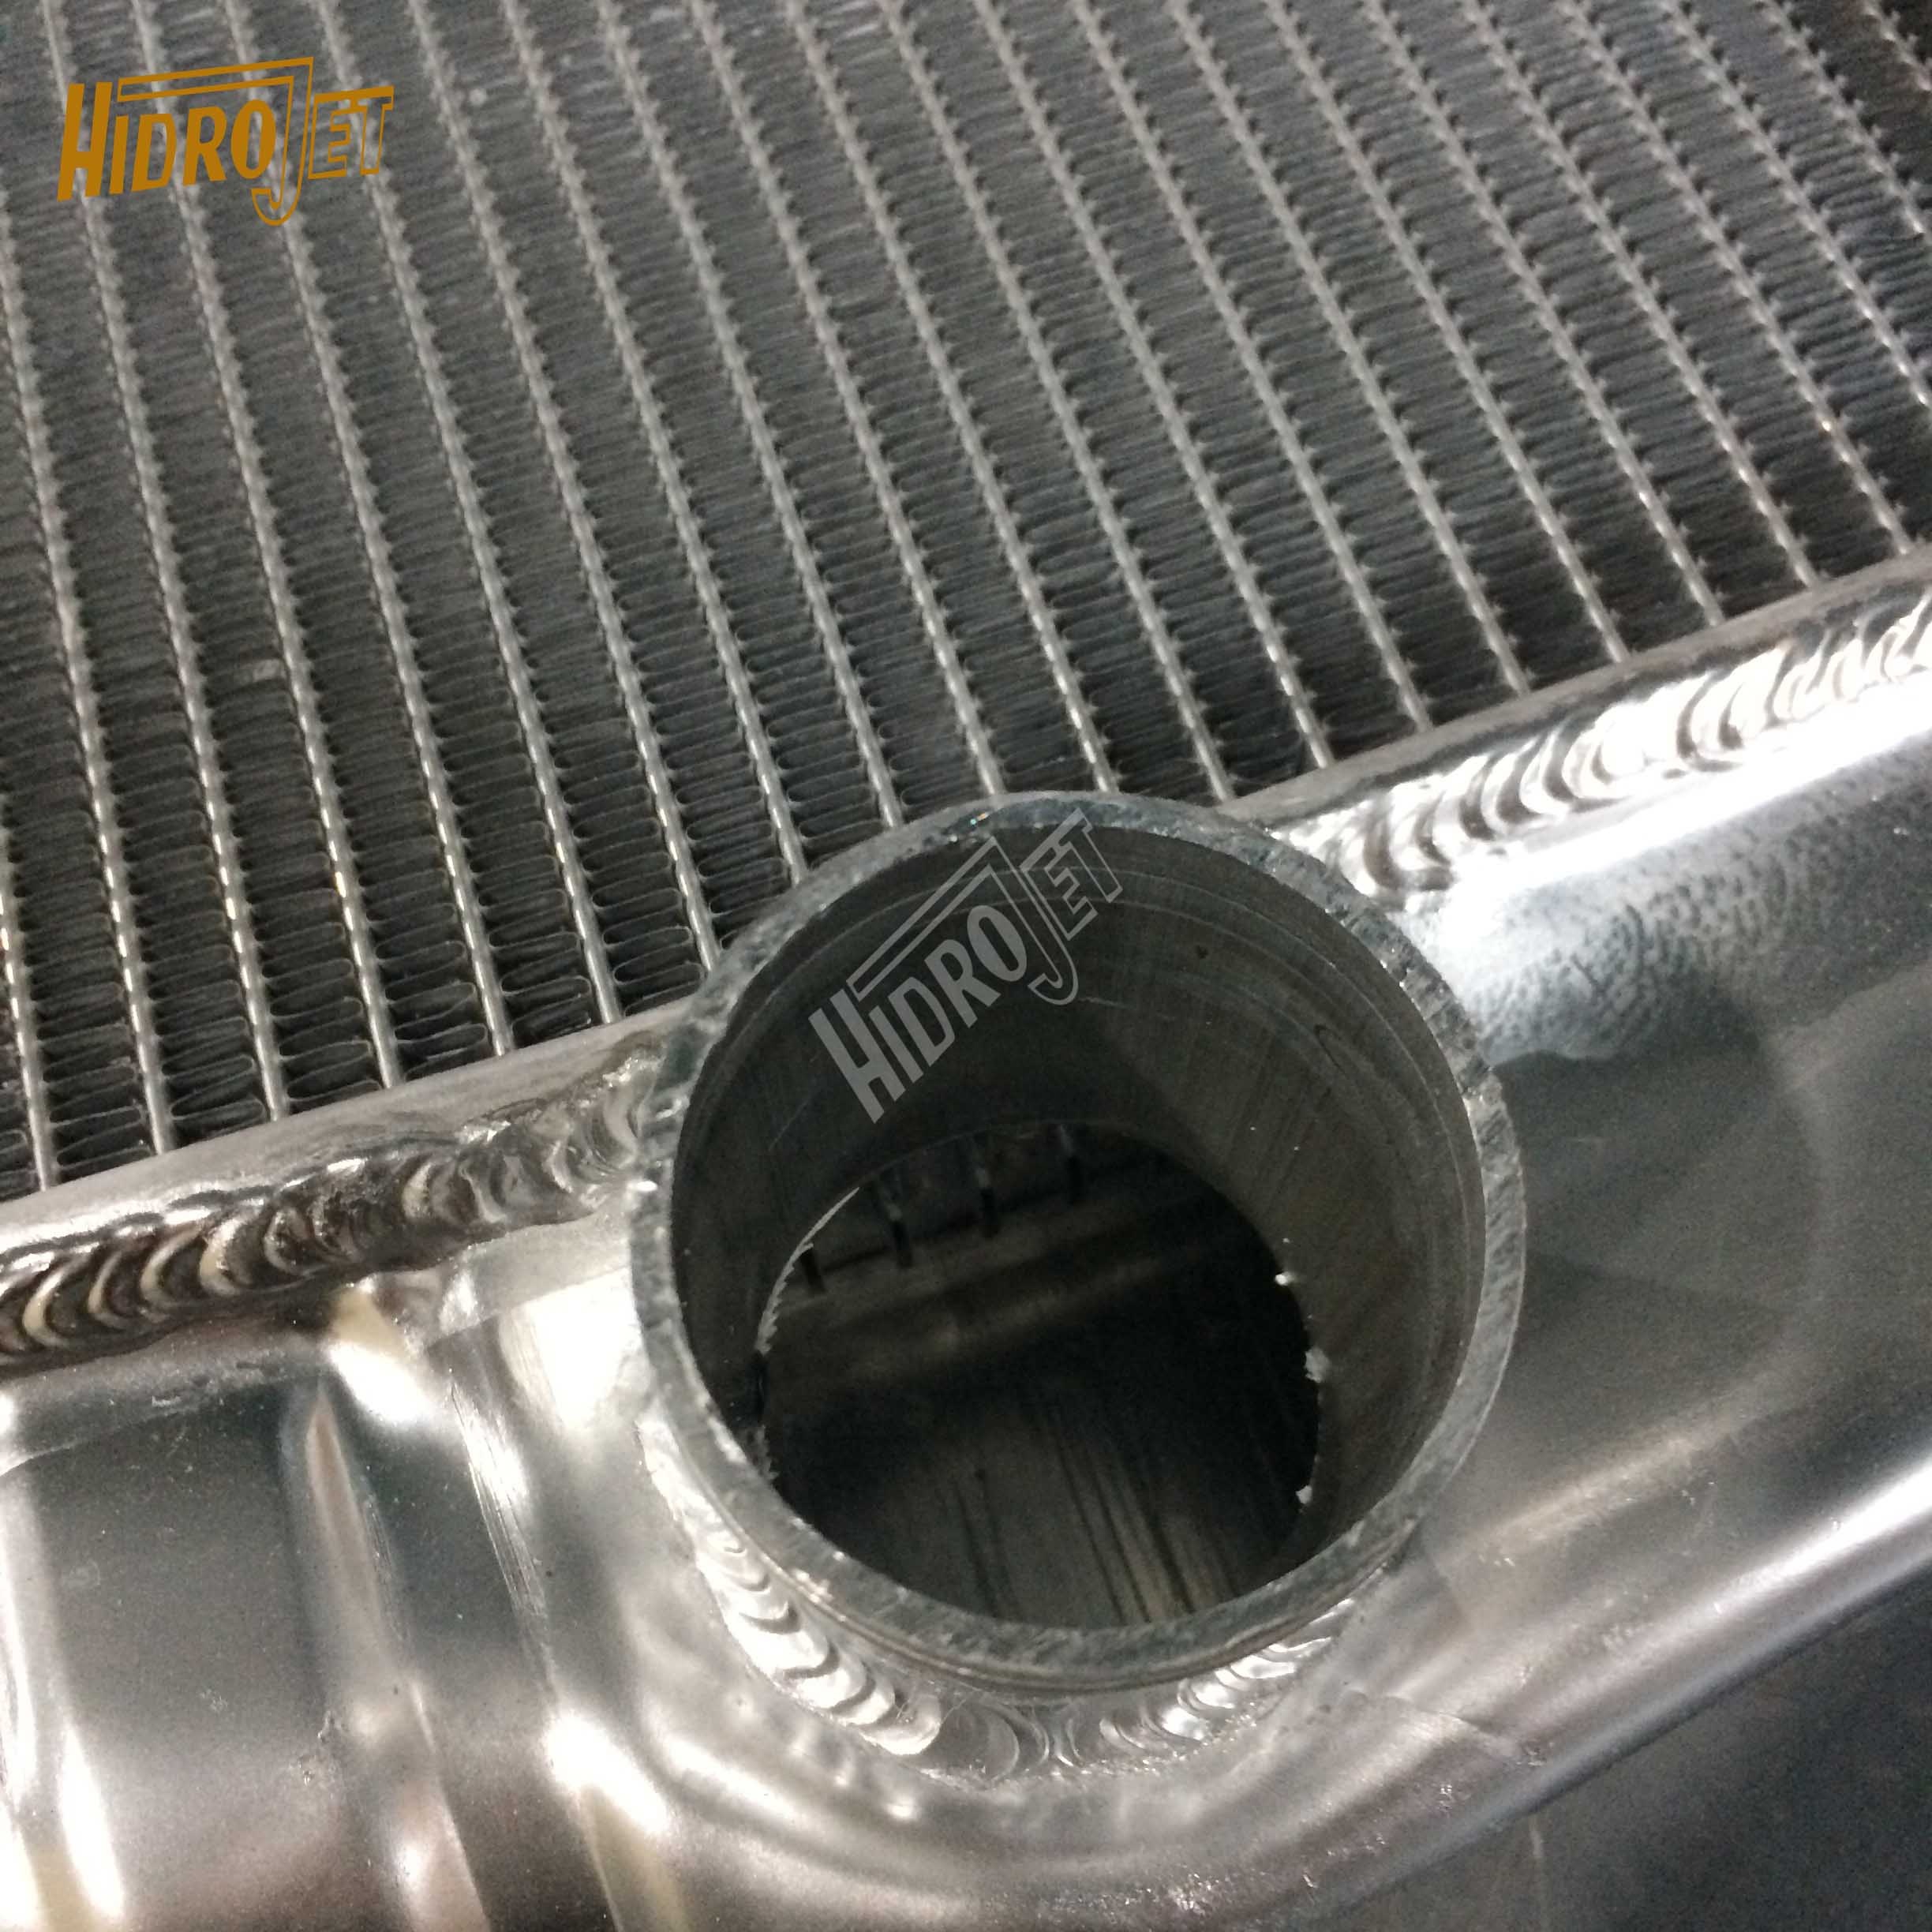 E325B's high quality cooling system hydraulic oil tank radiator